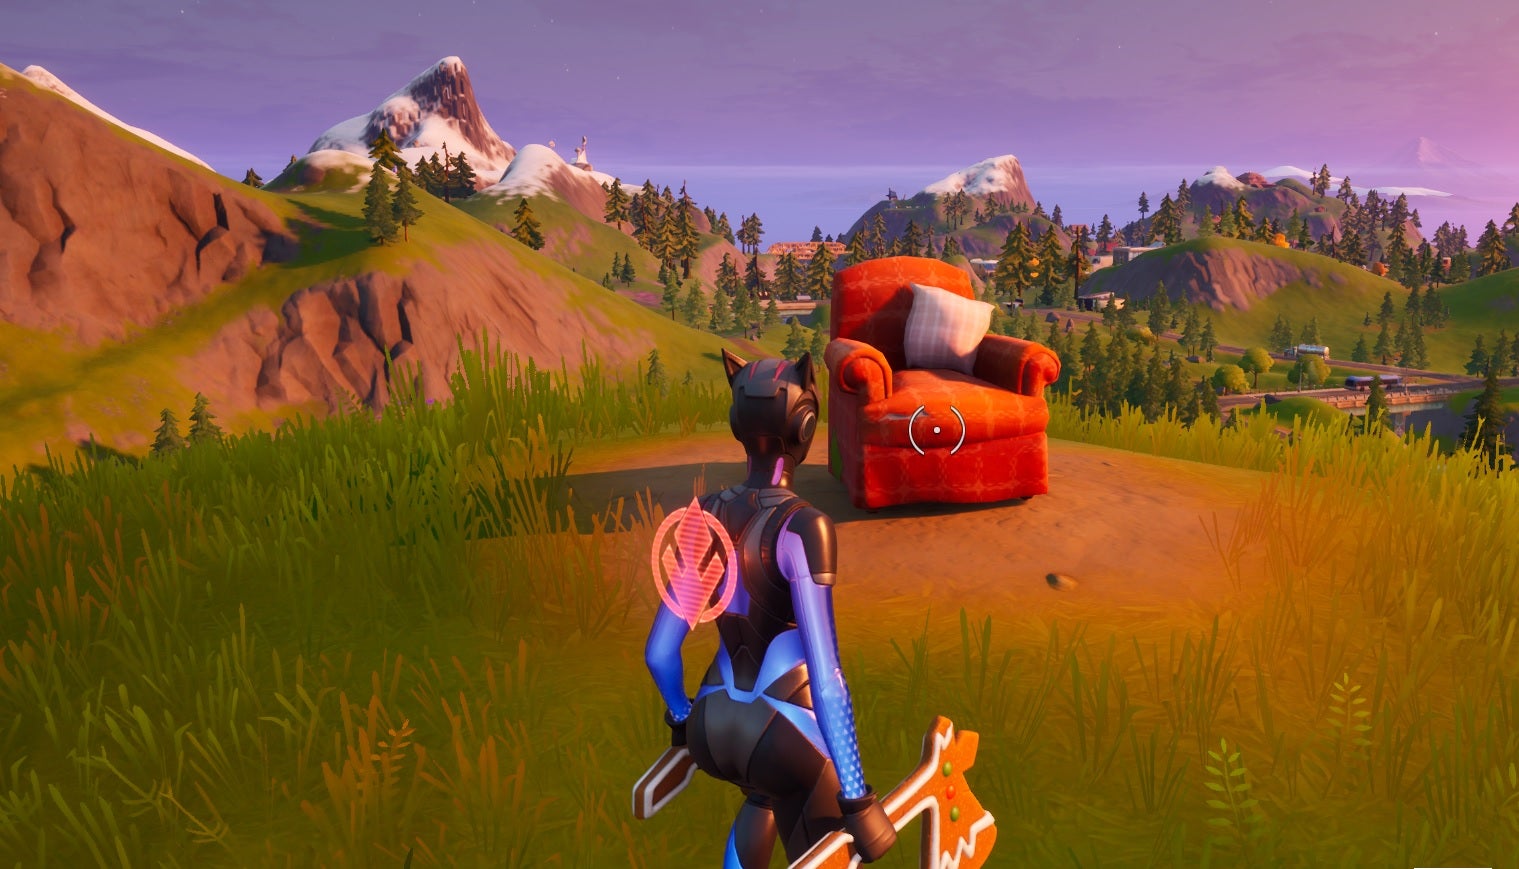 Image for Fortnite: Chapter 2 - Visit a lonely recliner, a radio station and an outdoor movie theater